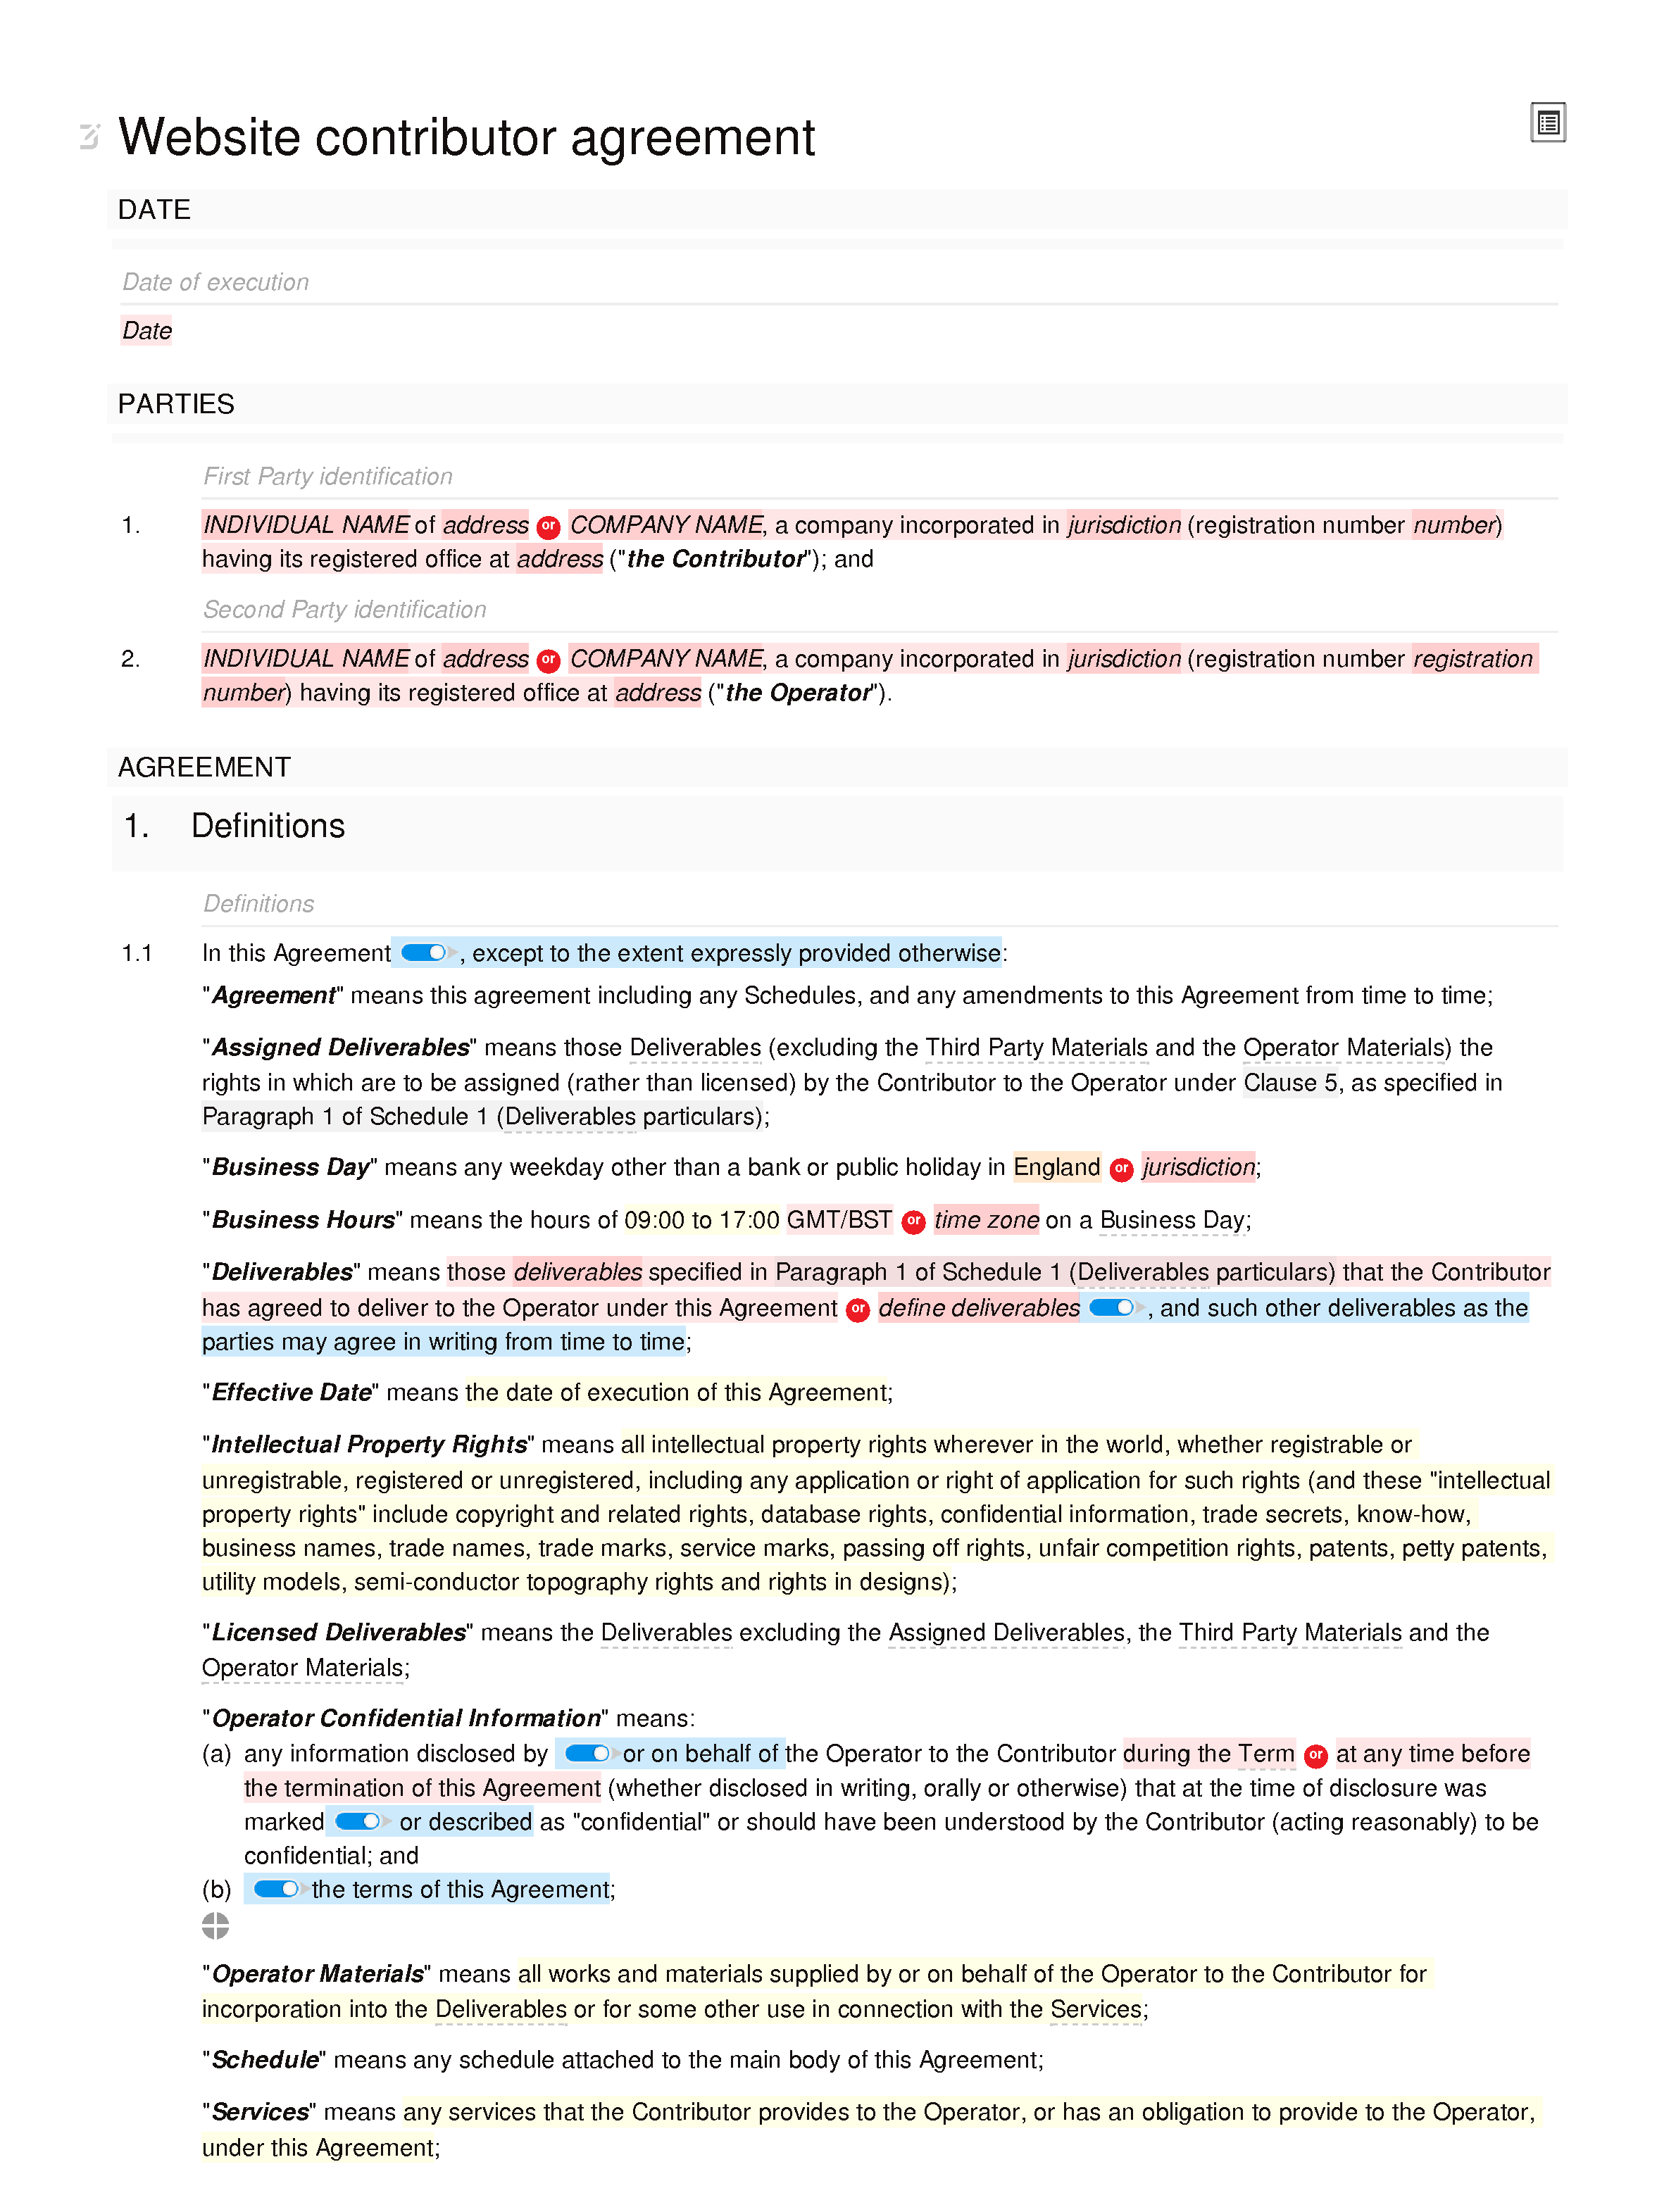 Website contributor agreement (unpaid) document editor preview